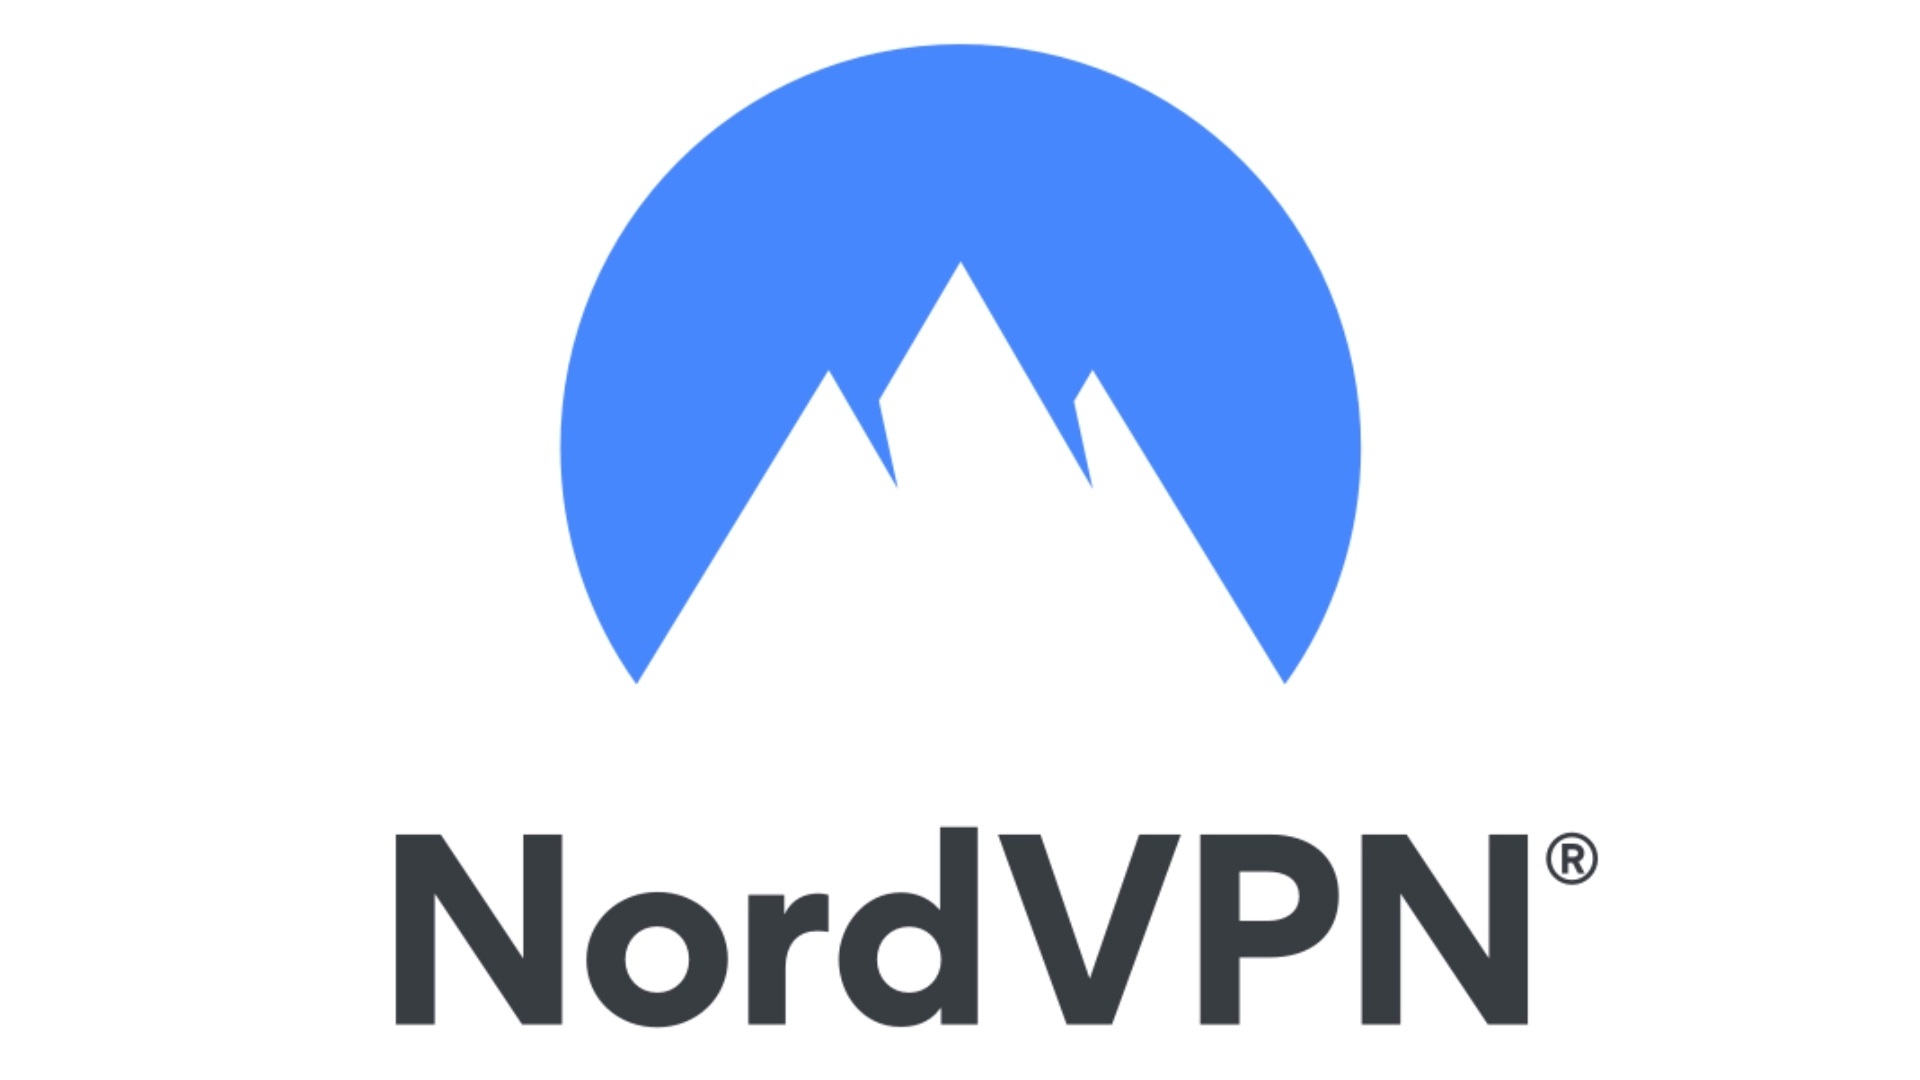 Best VPN for Chrome: NordVPN.  The image shows the company logo.